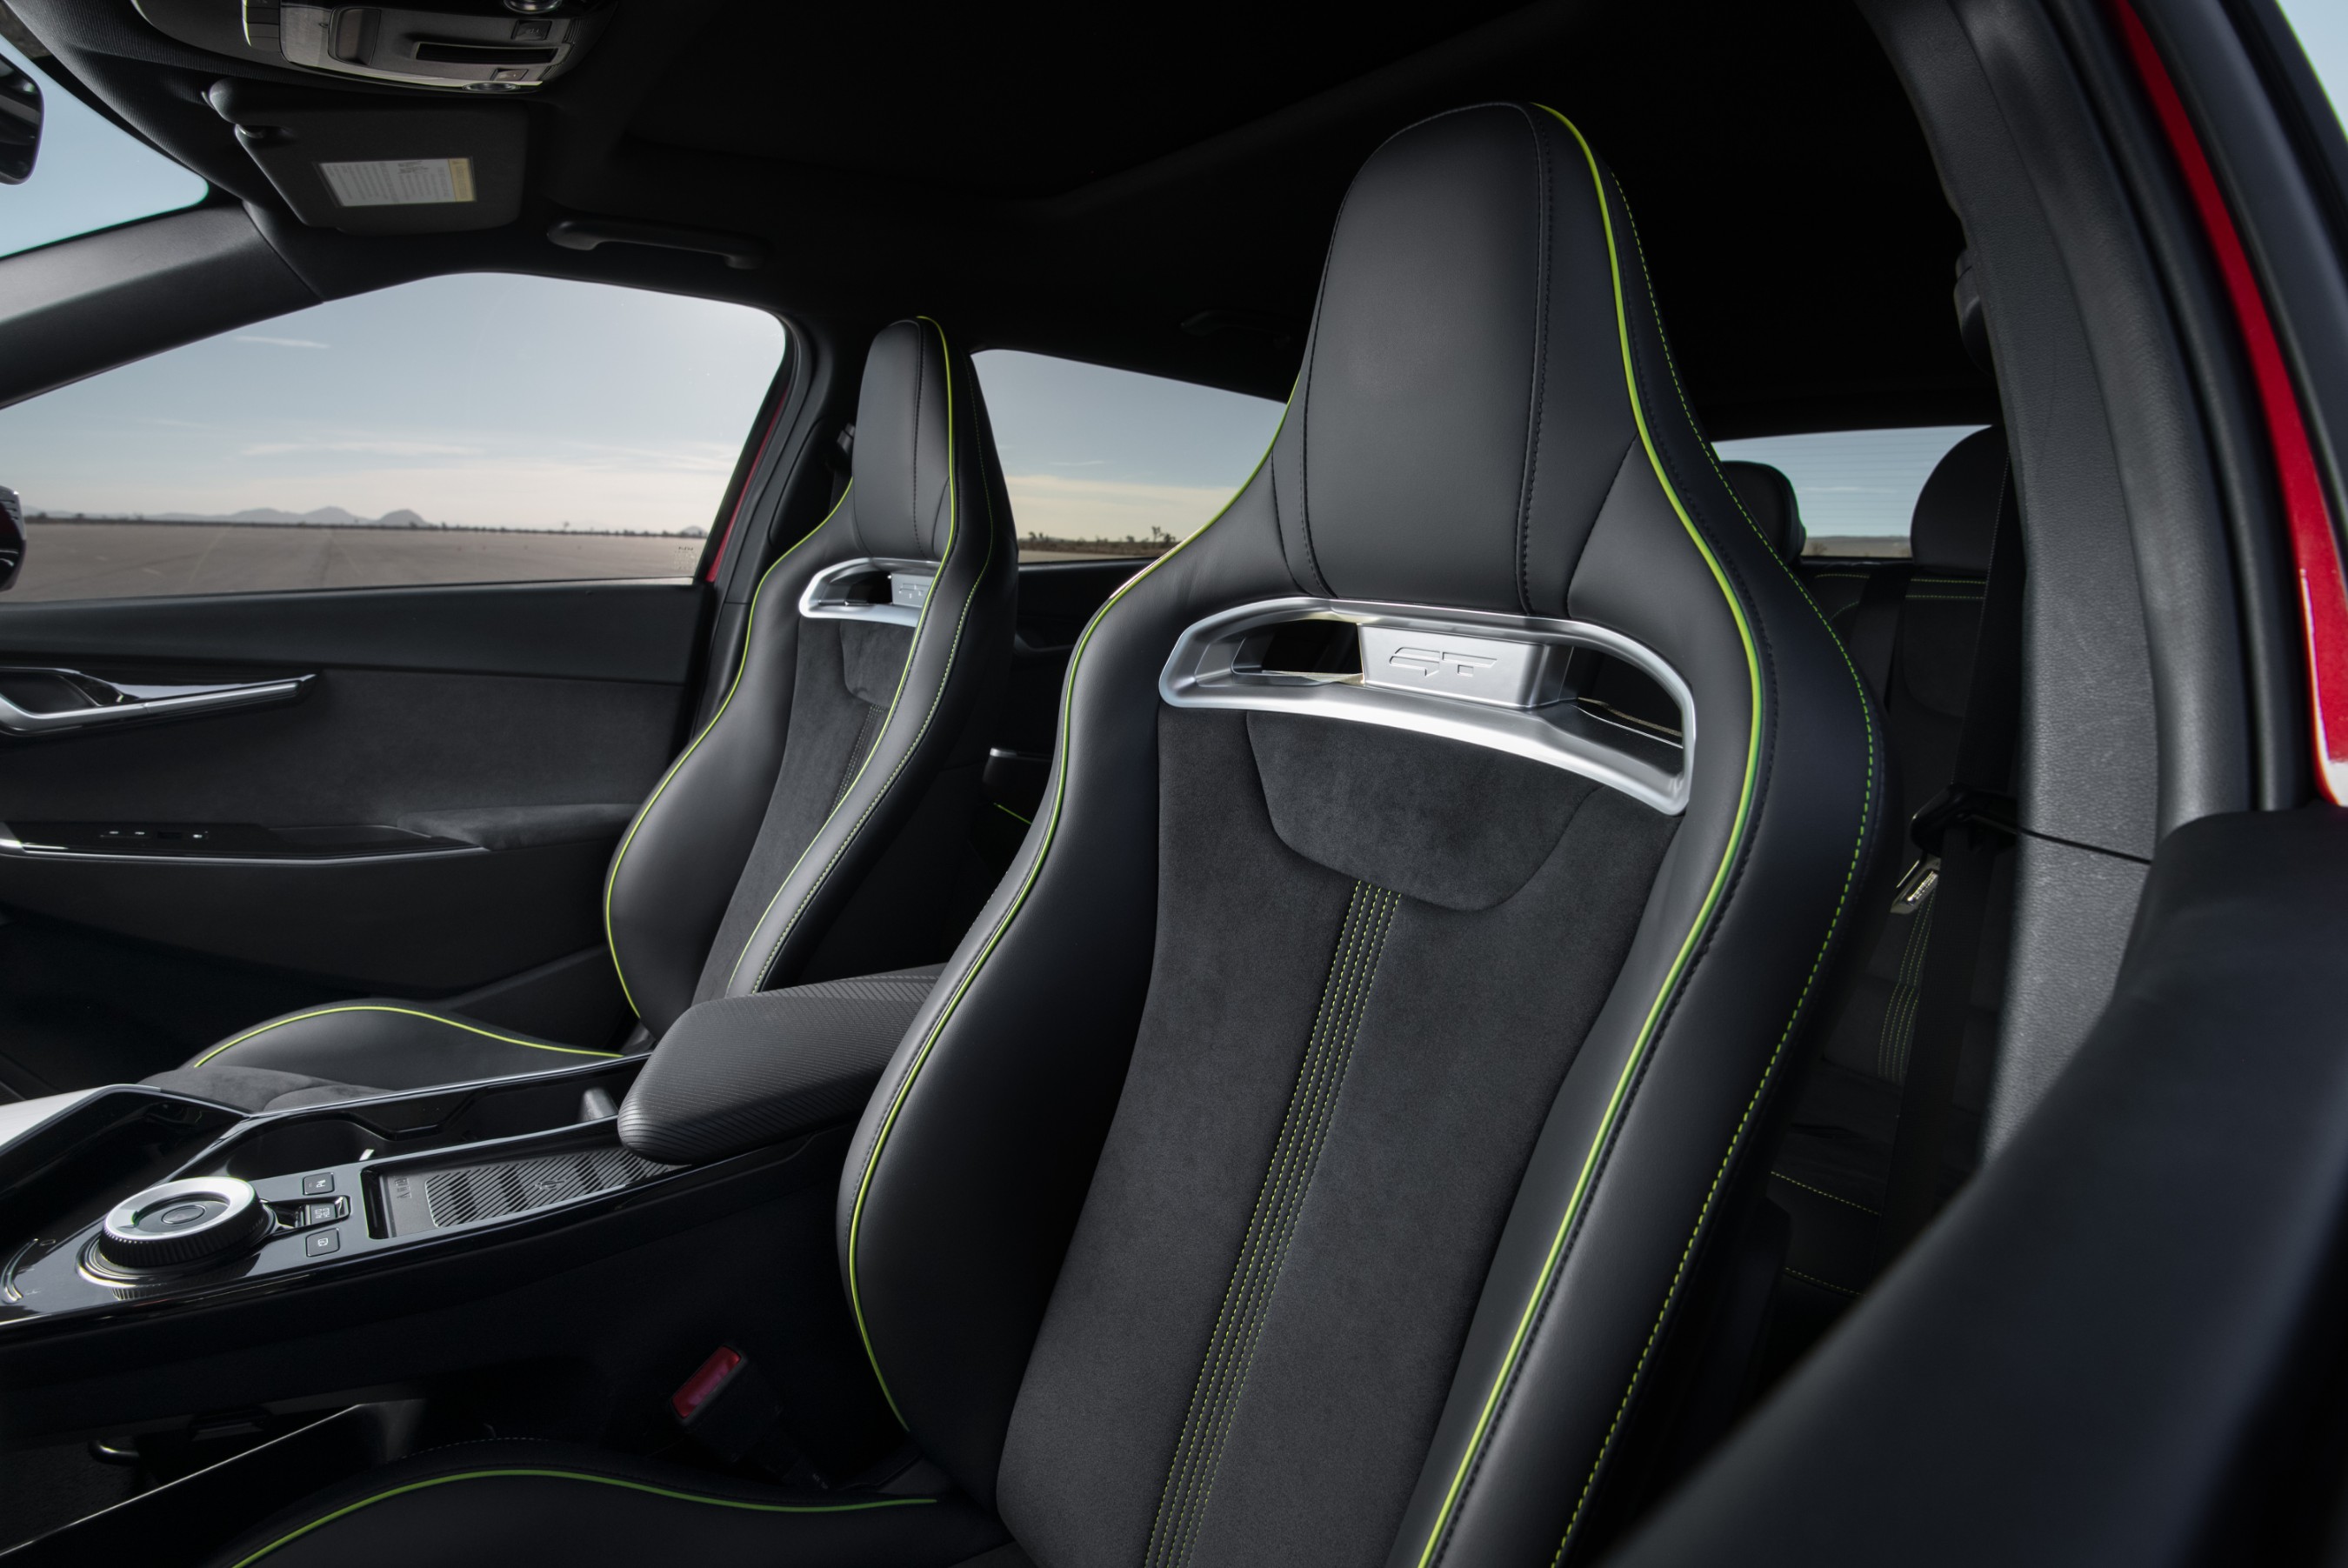 Kia’s EV6 GT driver-focused cabin enhancements include unique, racing-inspired sport bucket seats and neon green dash accents.